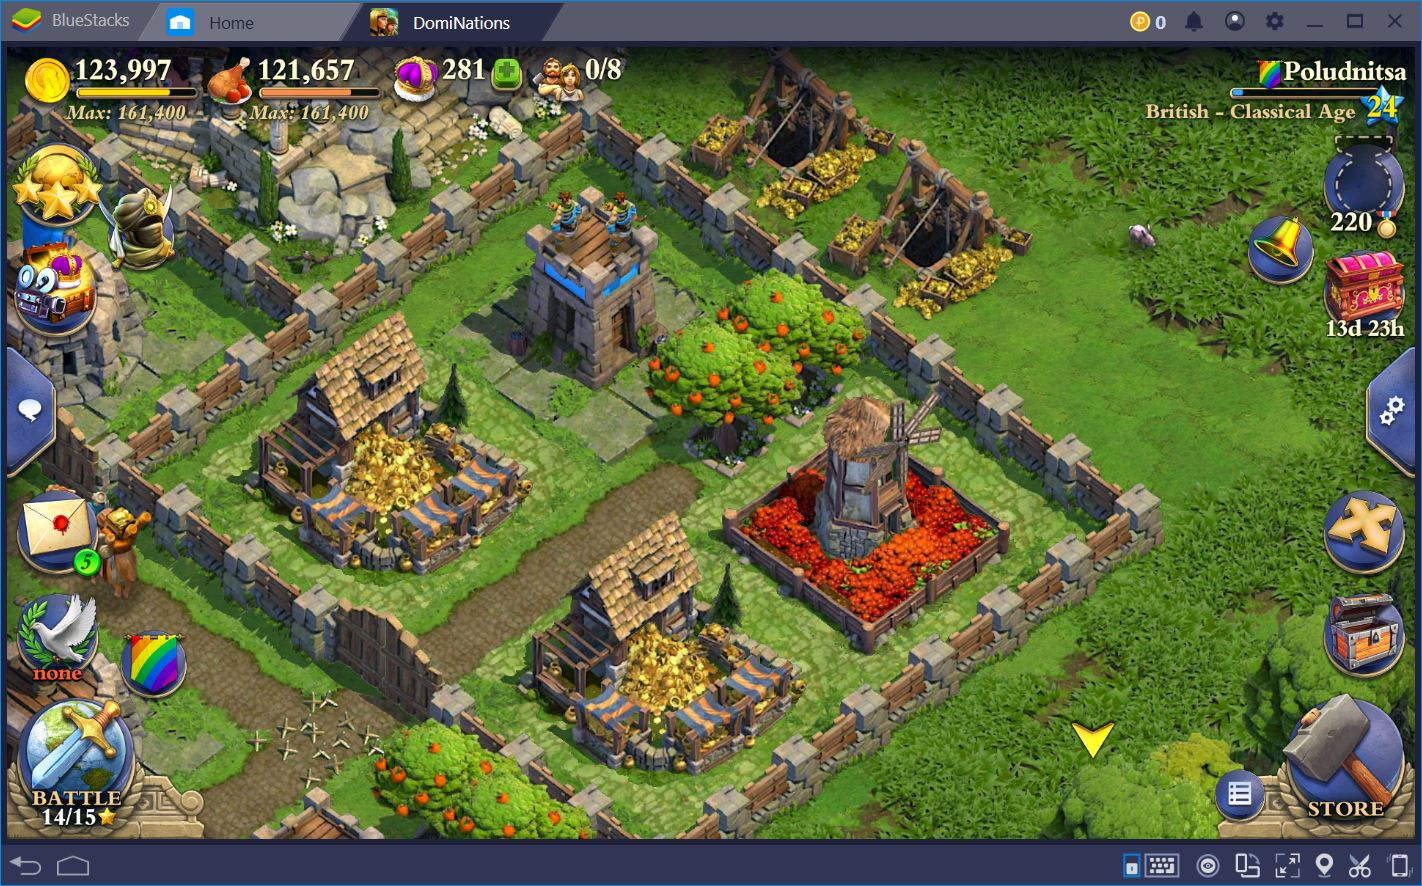 dominations best industrial age base layout